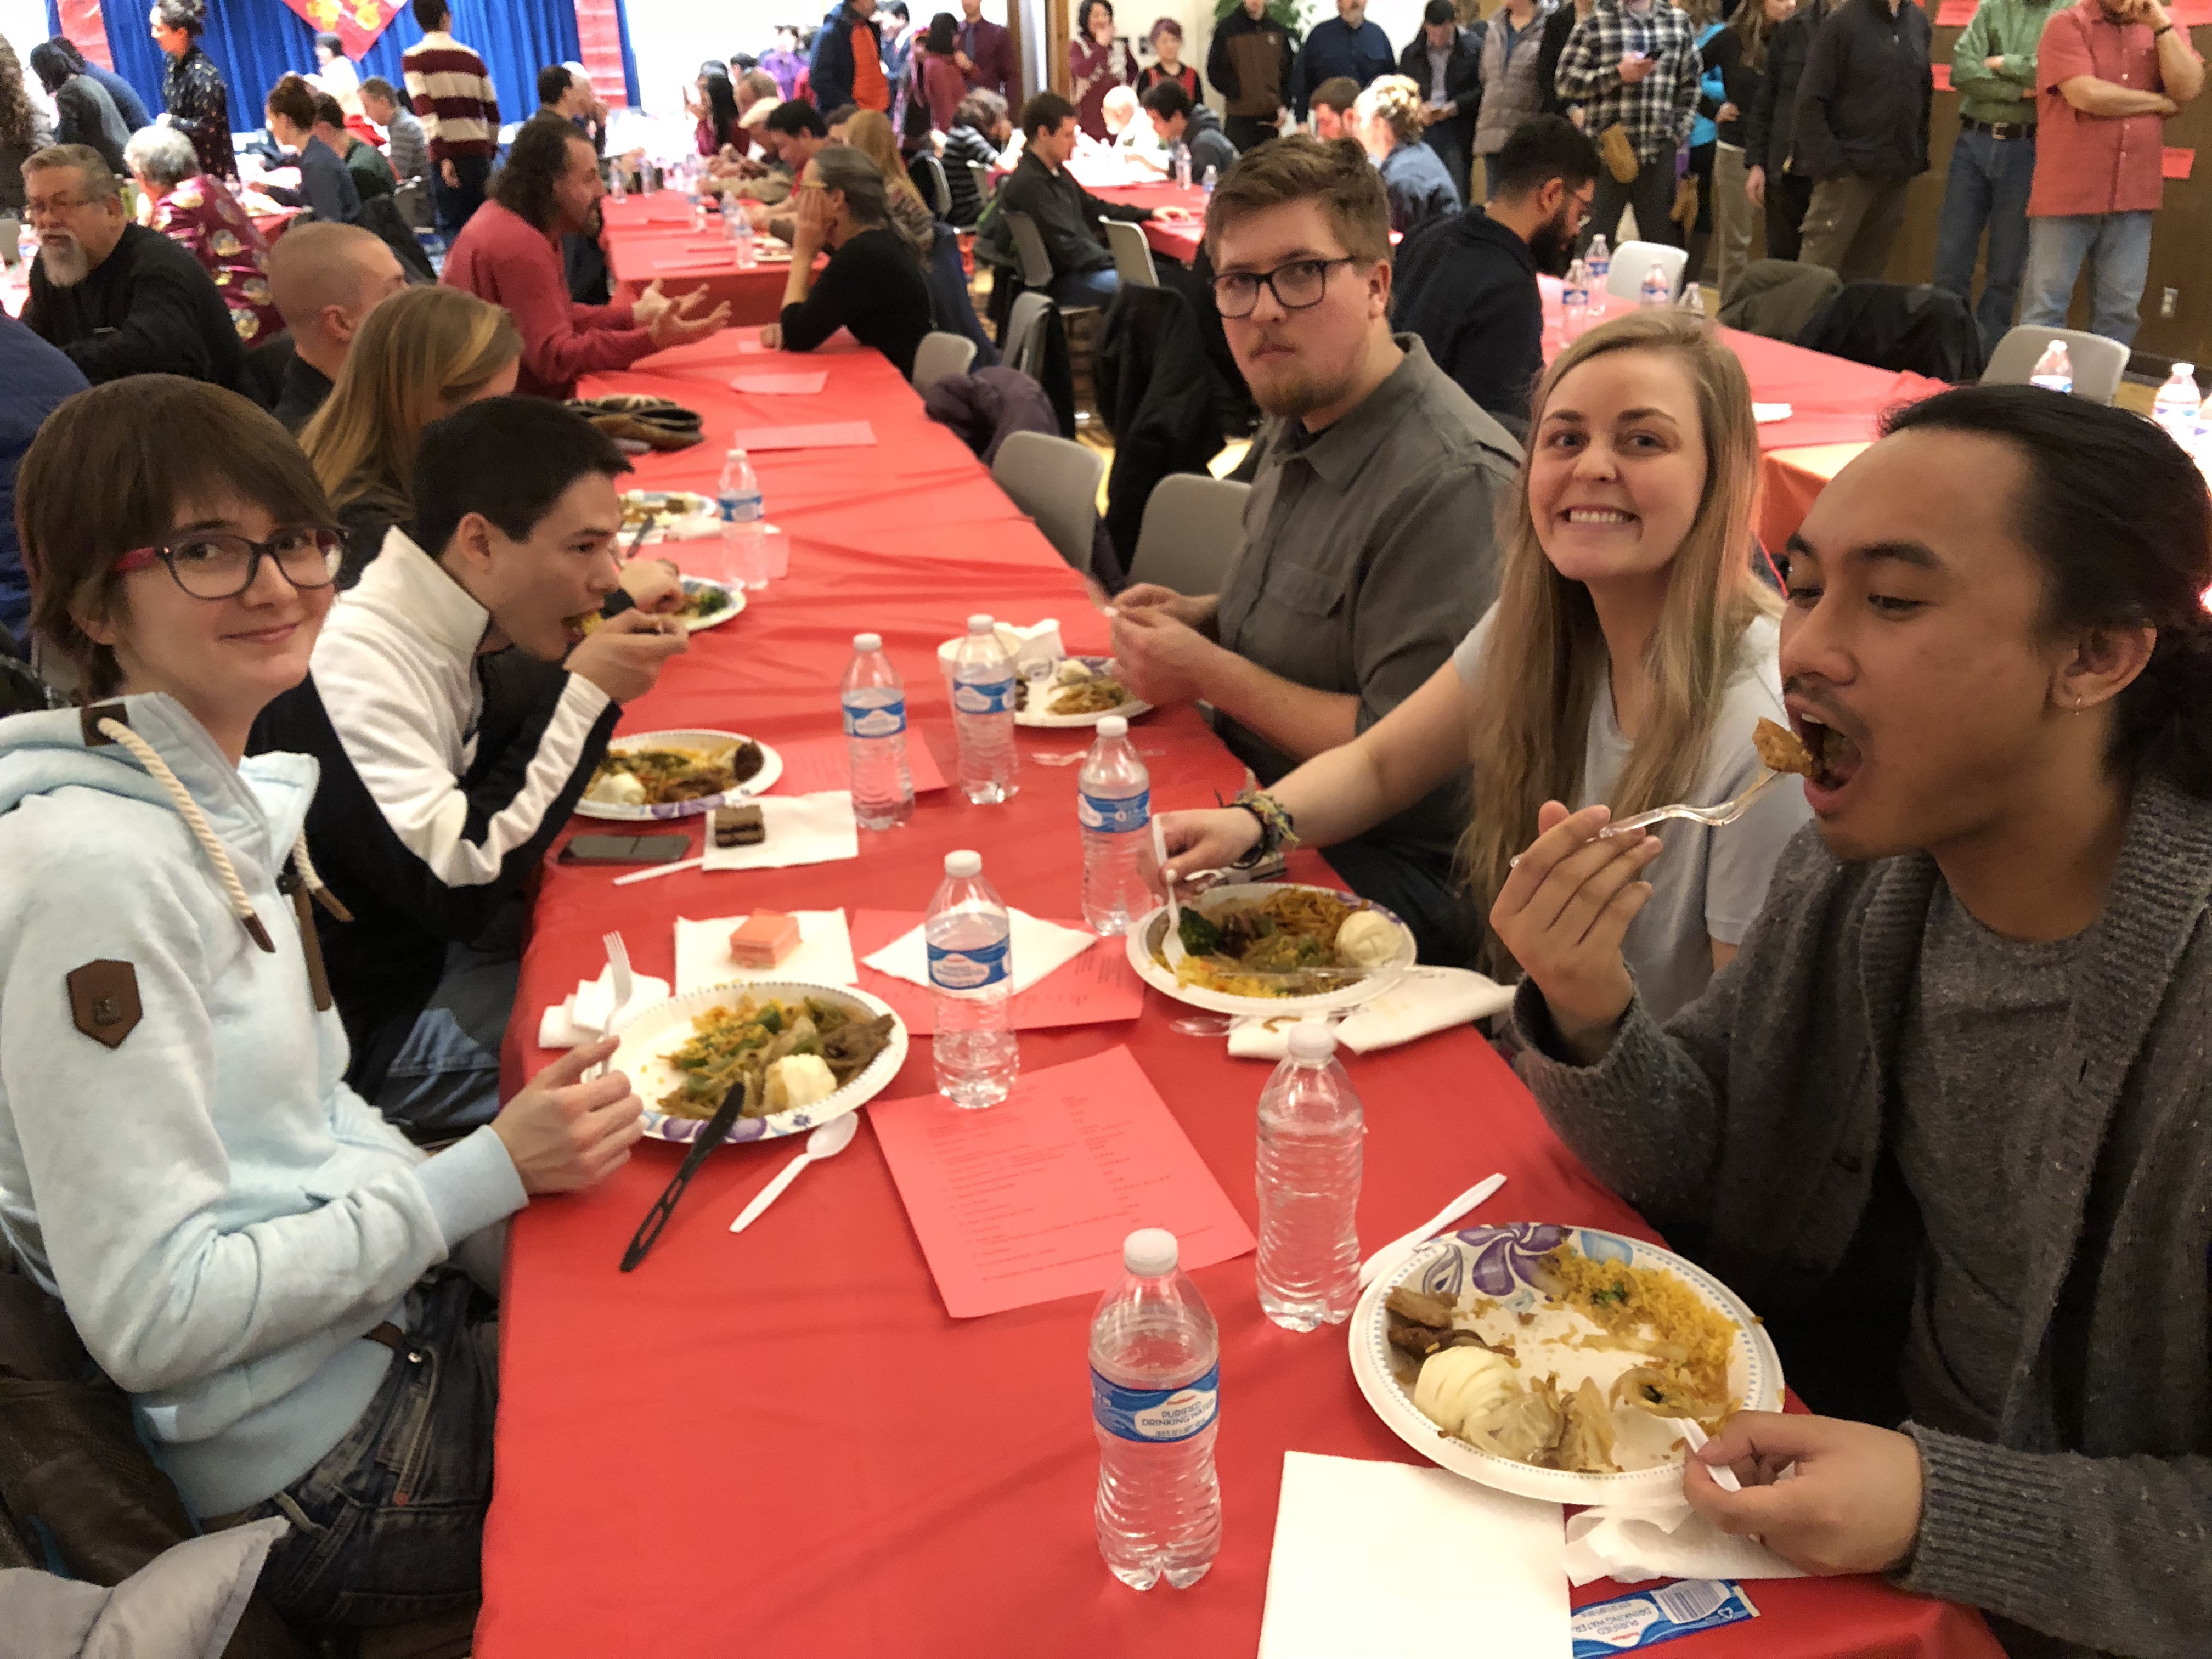 Attendees enjoy food at a previous UAF Lunar New Year celebration.